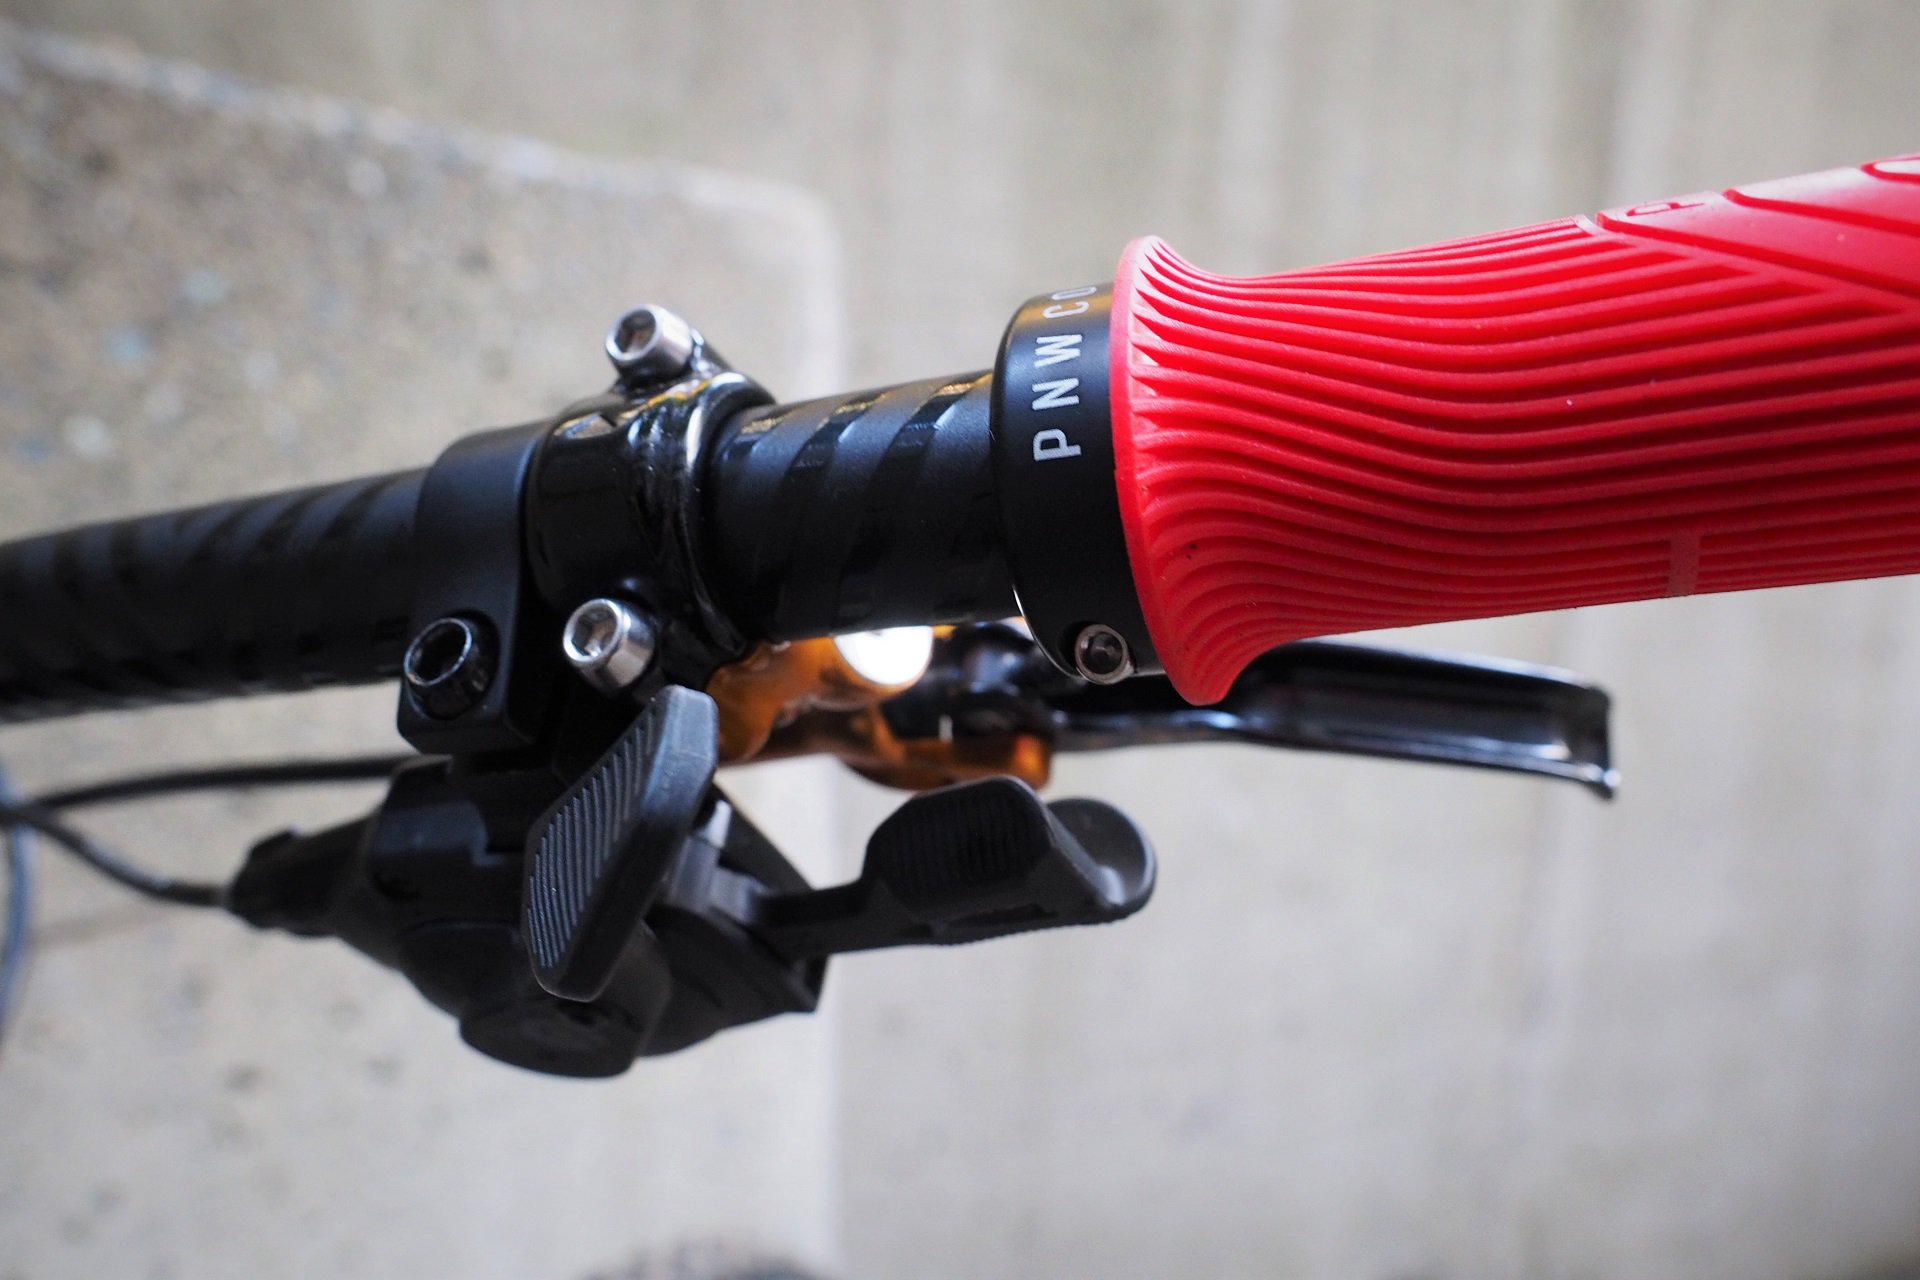 pnw loam grips review